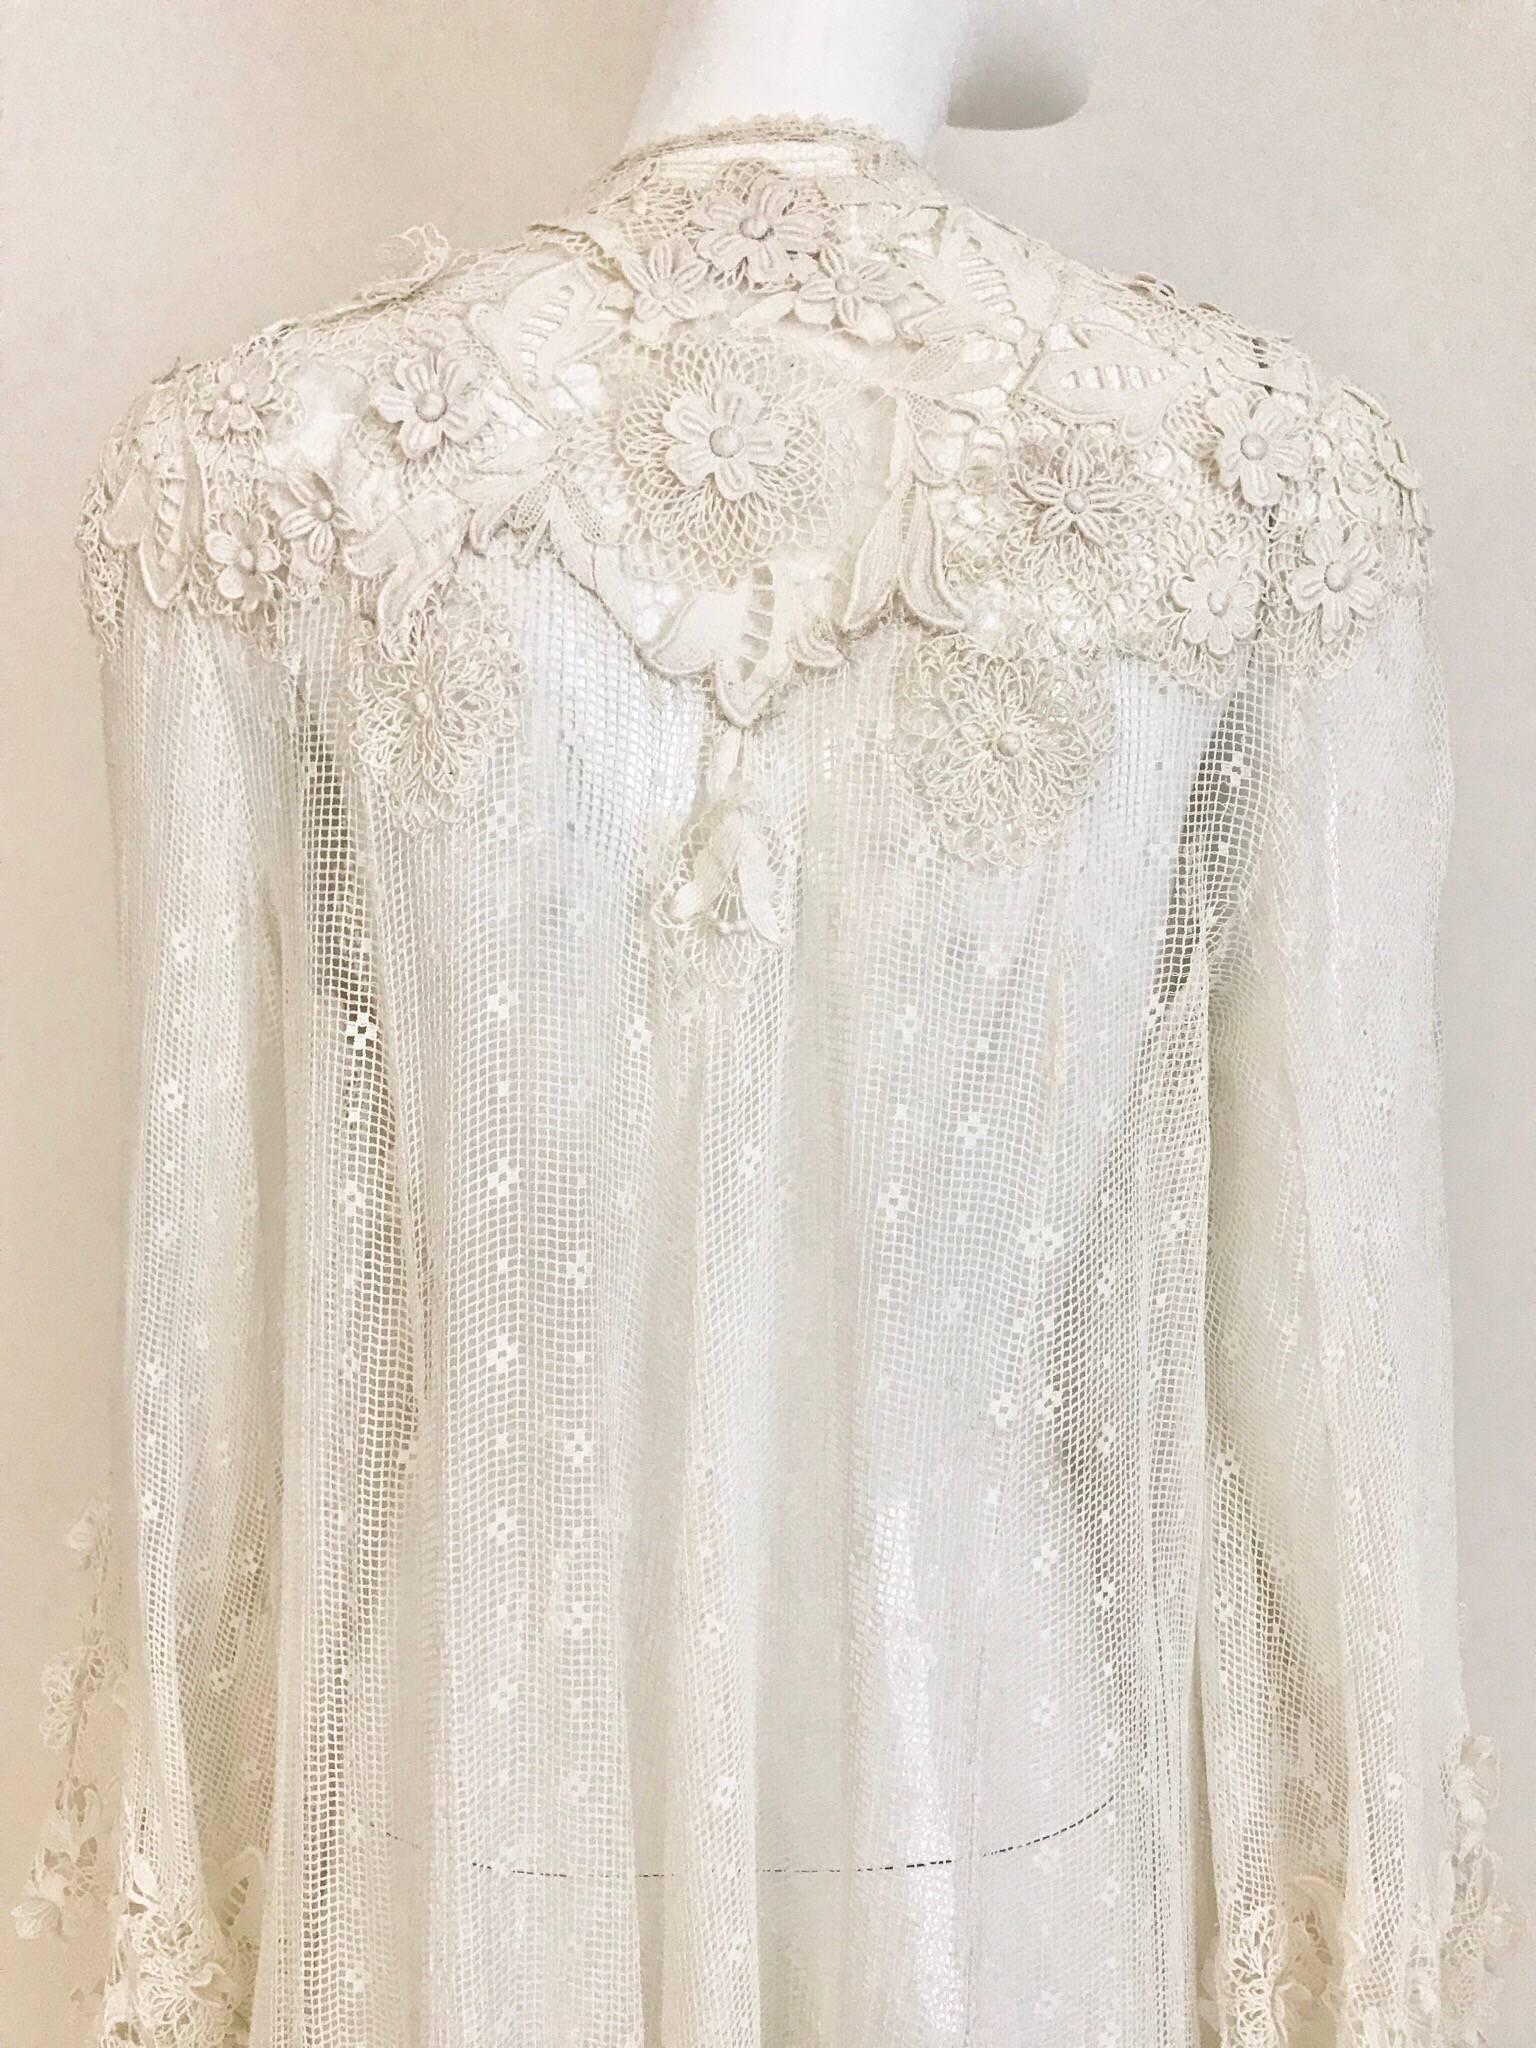 Beautiful 1900's Edwardian Cream Battenberg lace coat with dramatic sleeves.
Fit size: 2/4/6/8 . Coat still wearable. Small - Medium
Coat length: 56 inches/ Sleeve length: 29 inches